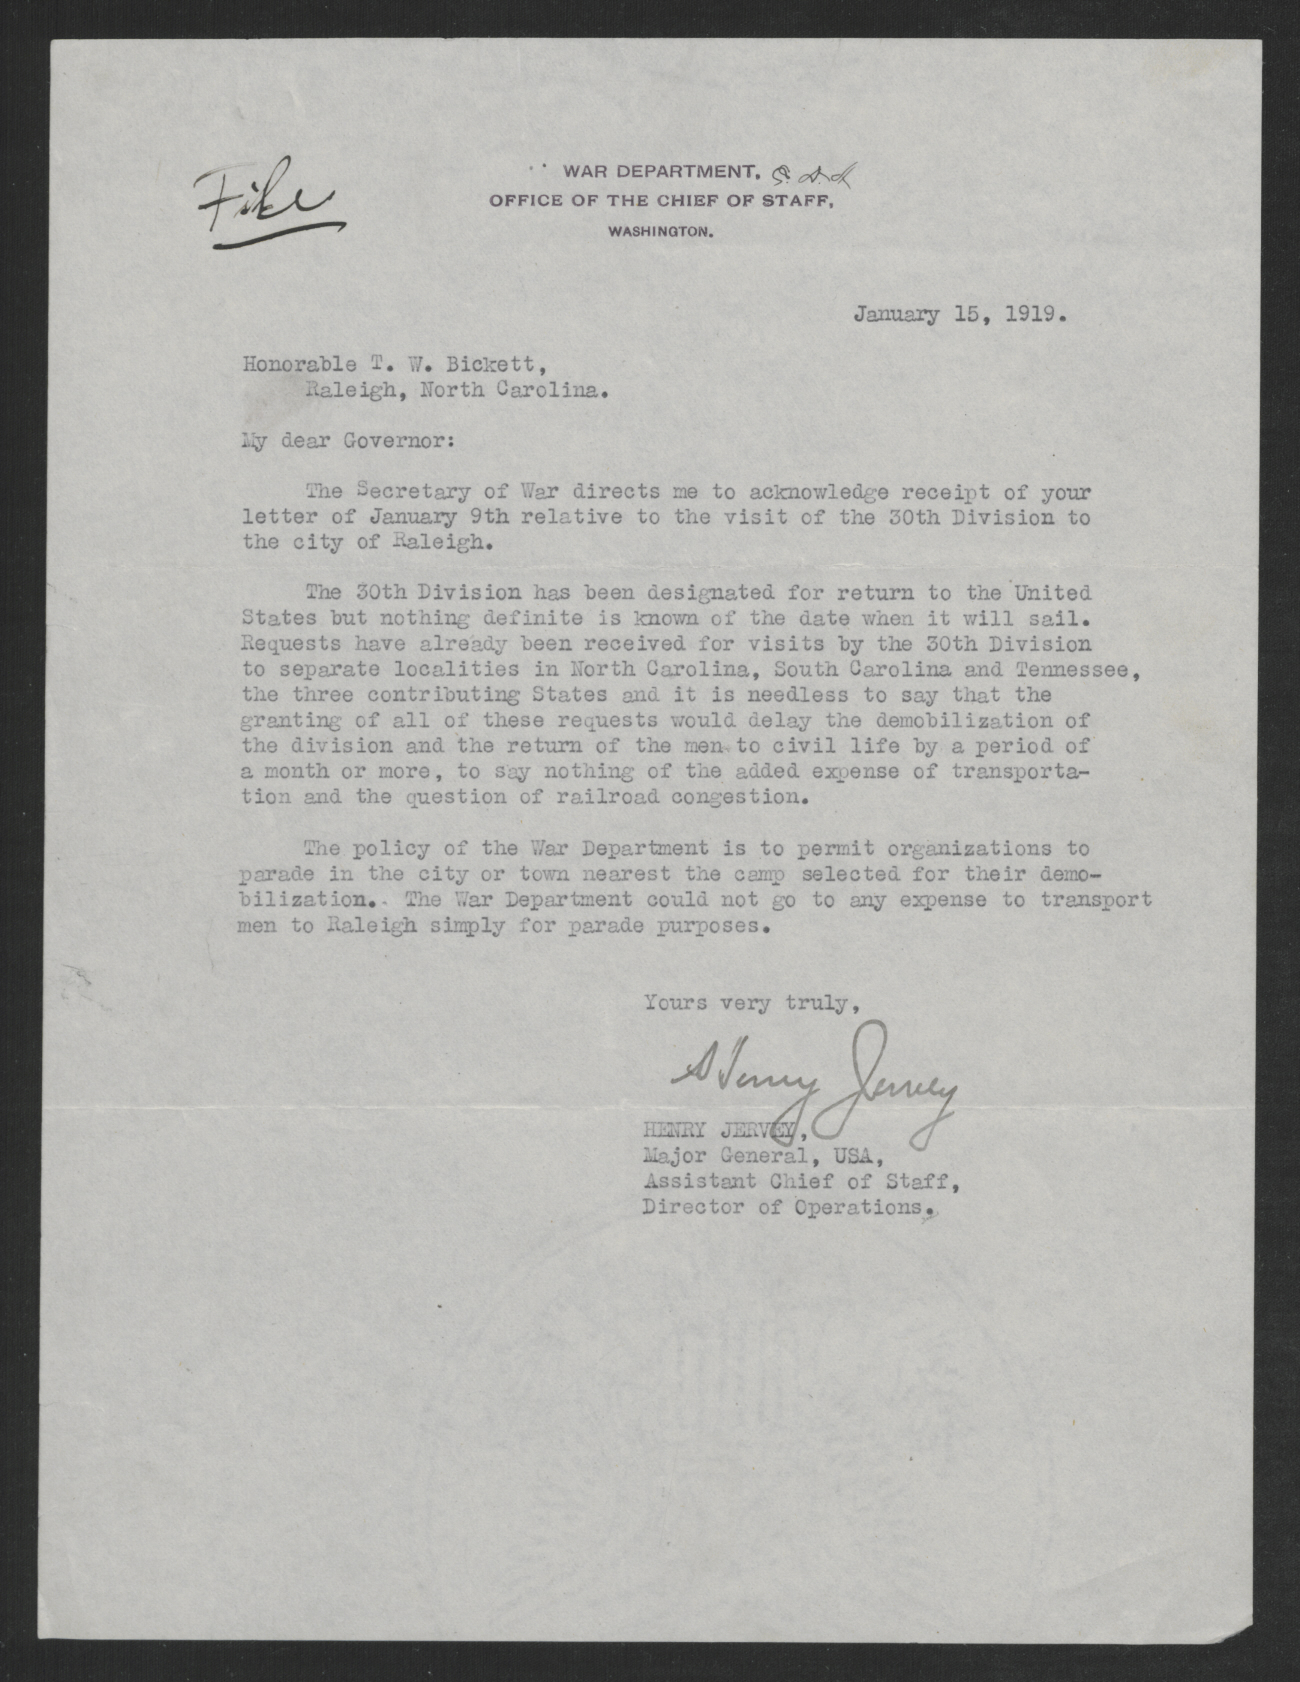 Letter from Henry Jervey to Thomas W. Bickett, January 15, 1919